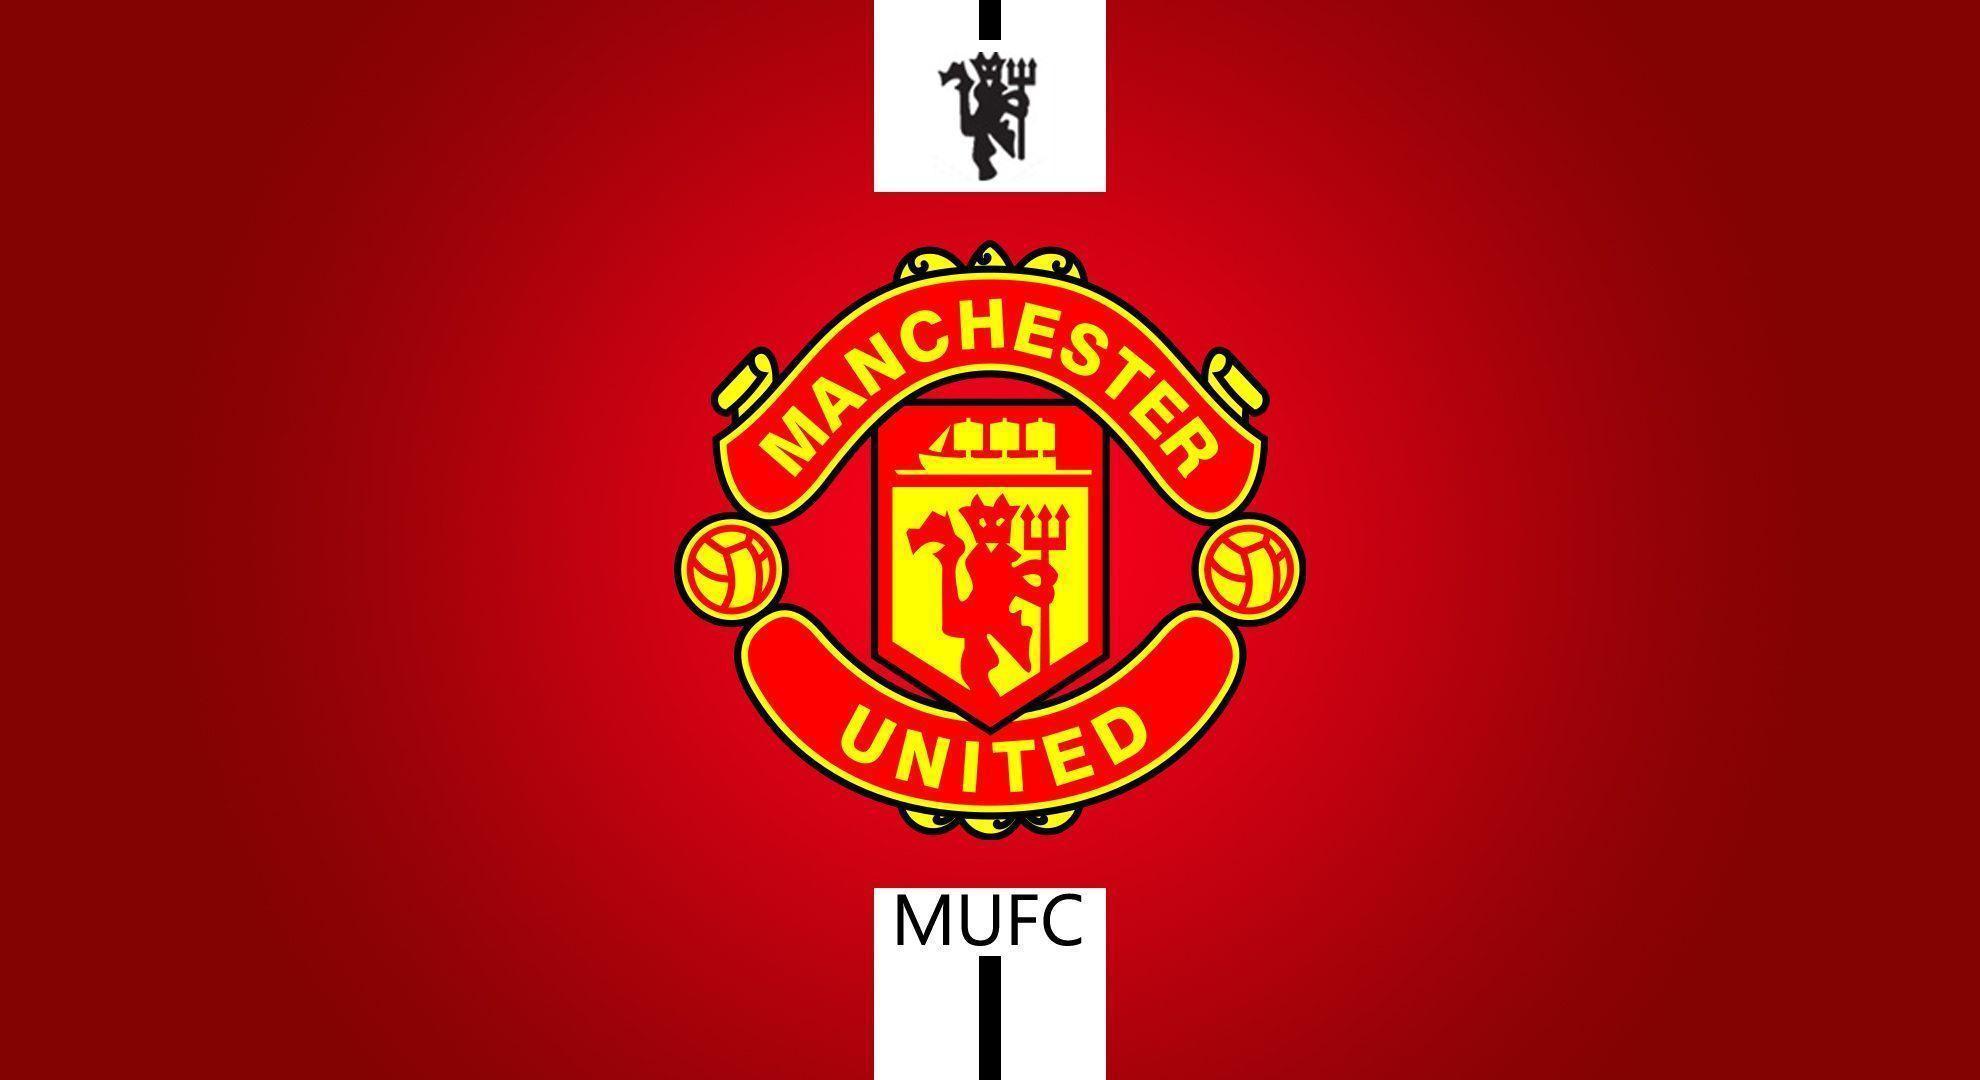 Wallpapers Manchester United Logo Cave On 2017 Hd Image For Iphone